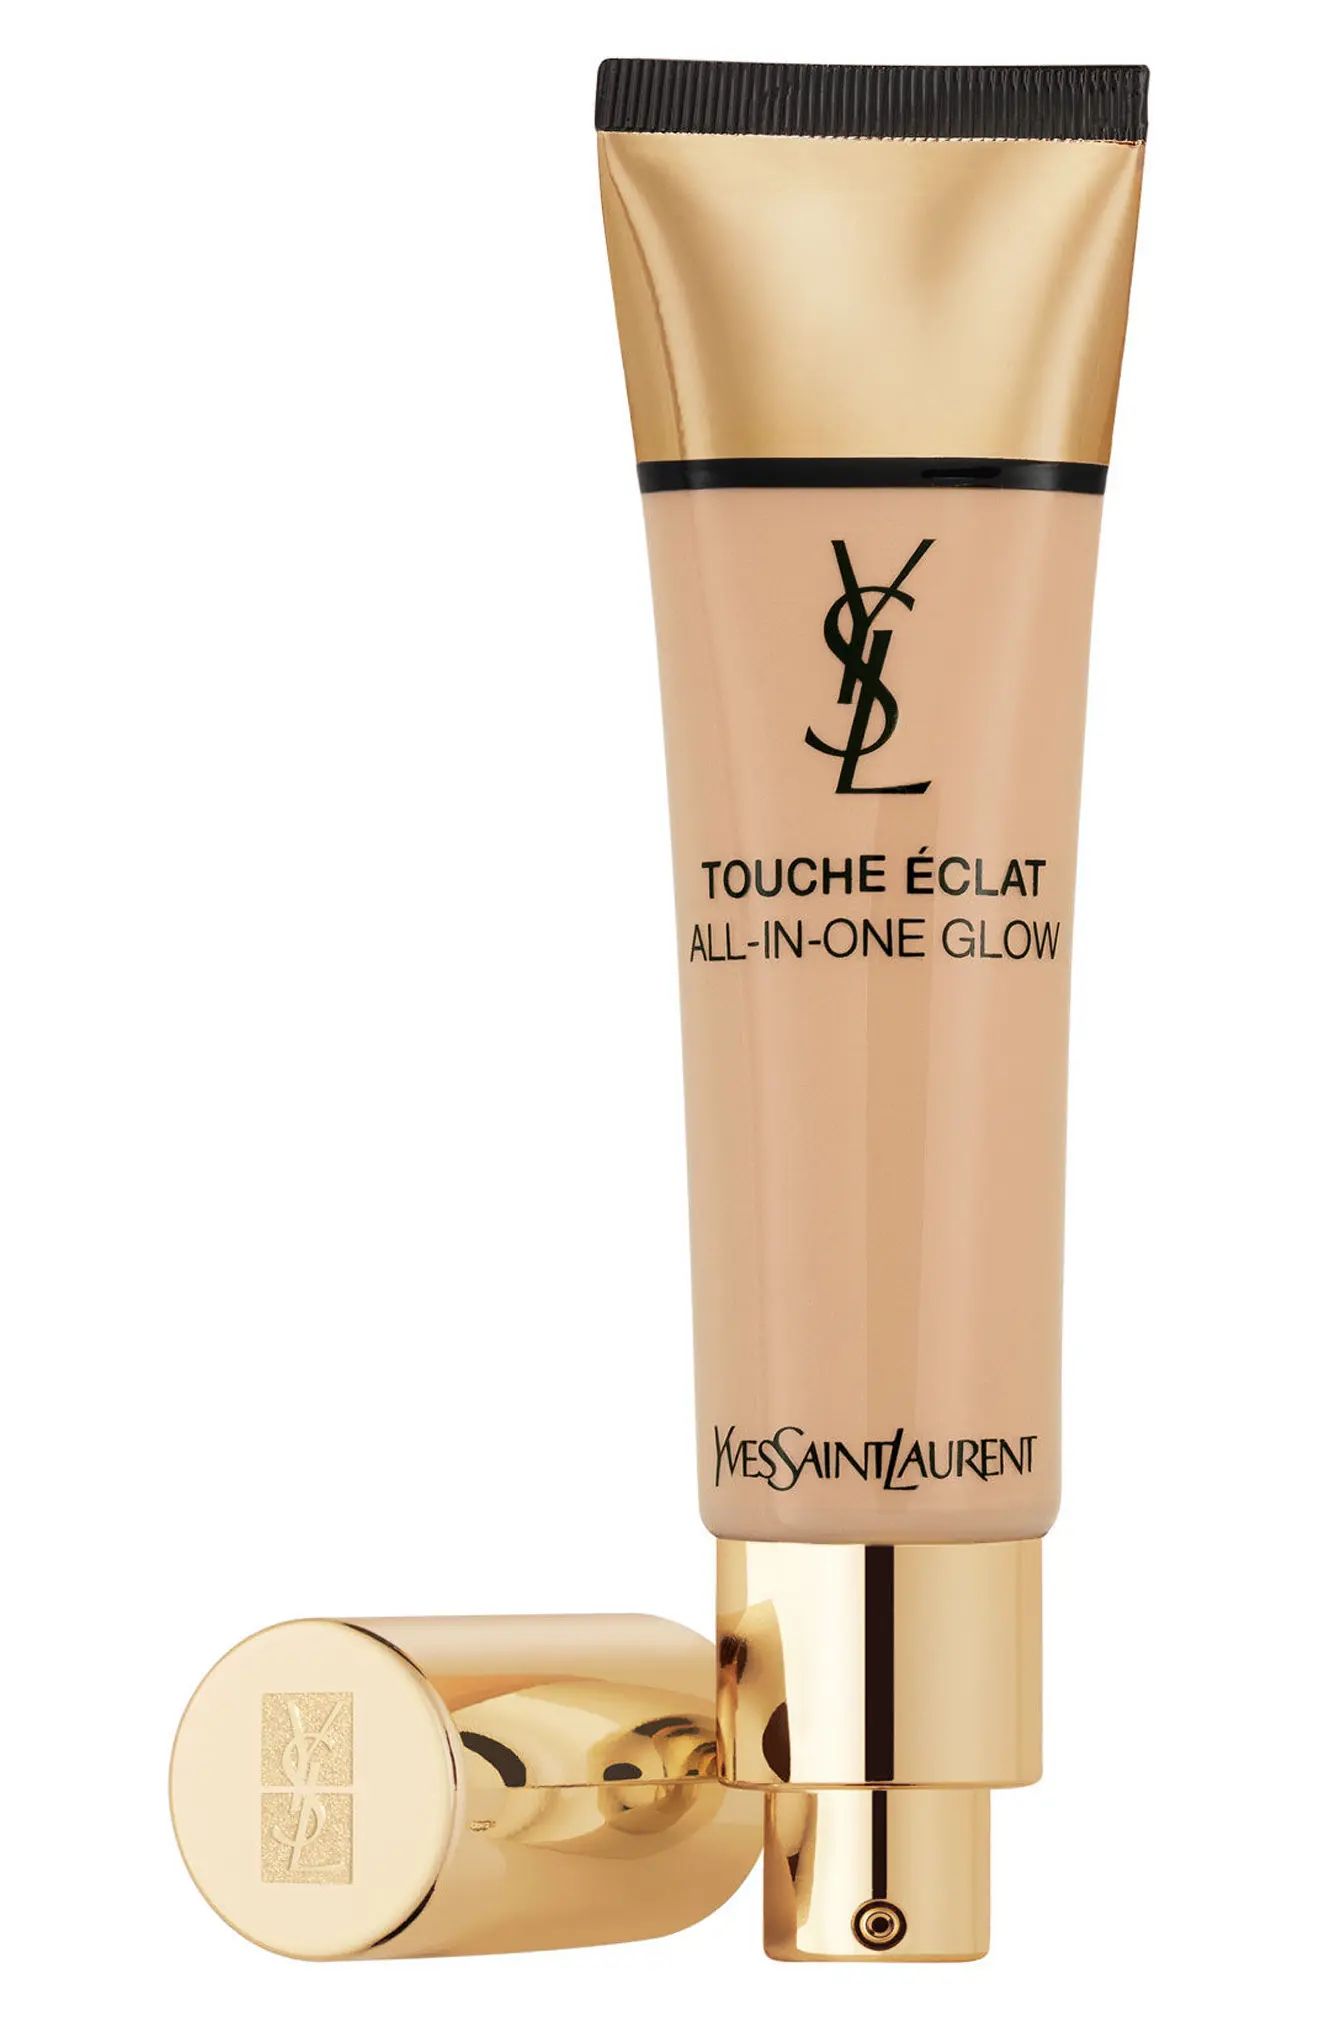 Yves Saint Laurent Touche Éclat All-in-One Glow | Nordstrom